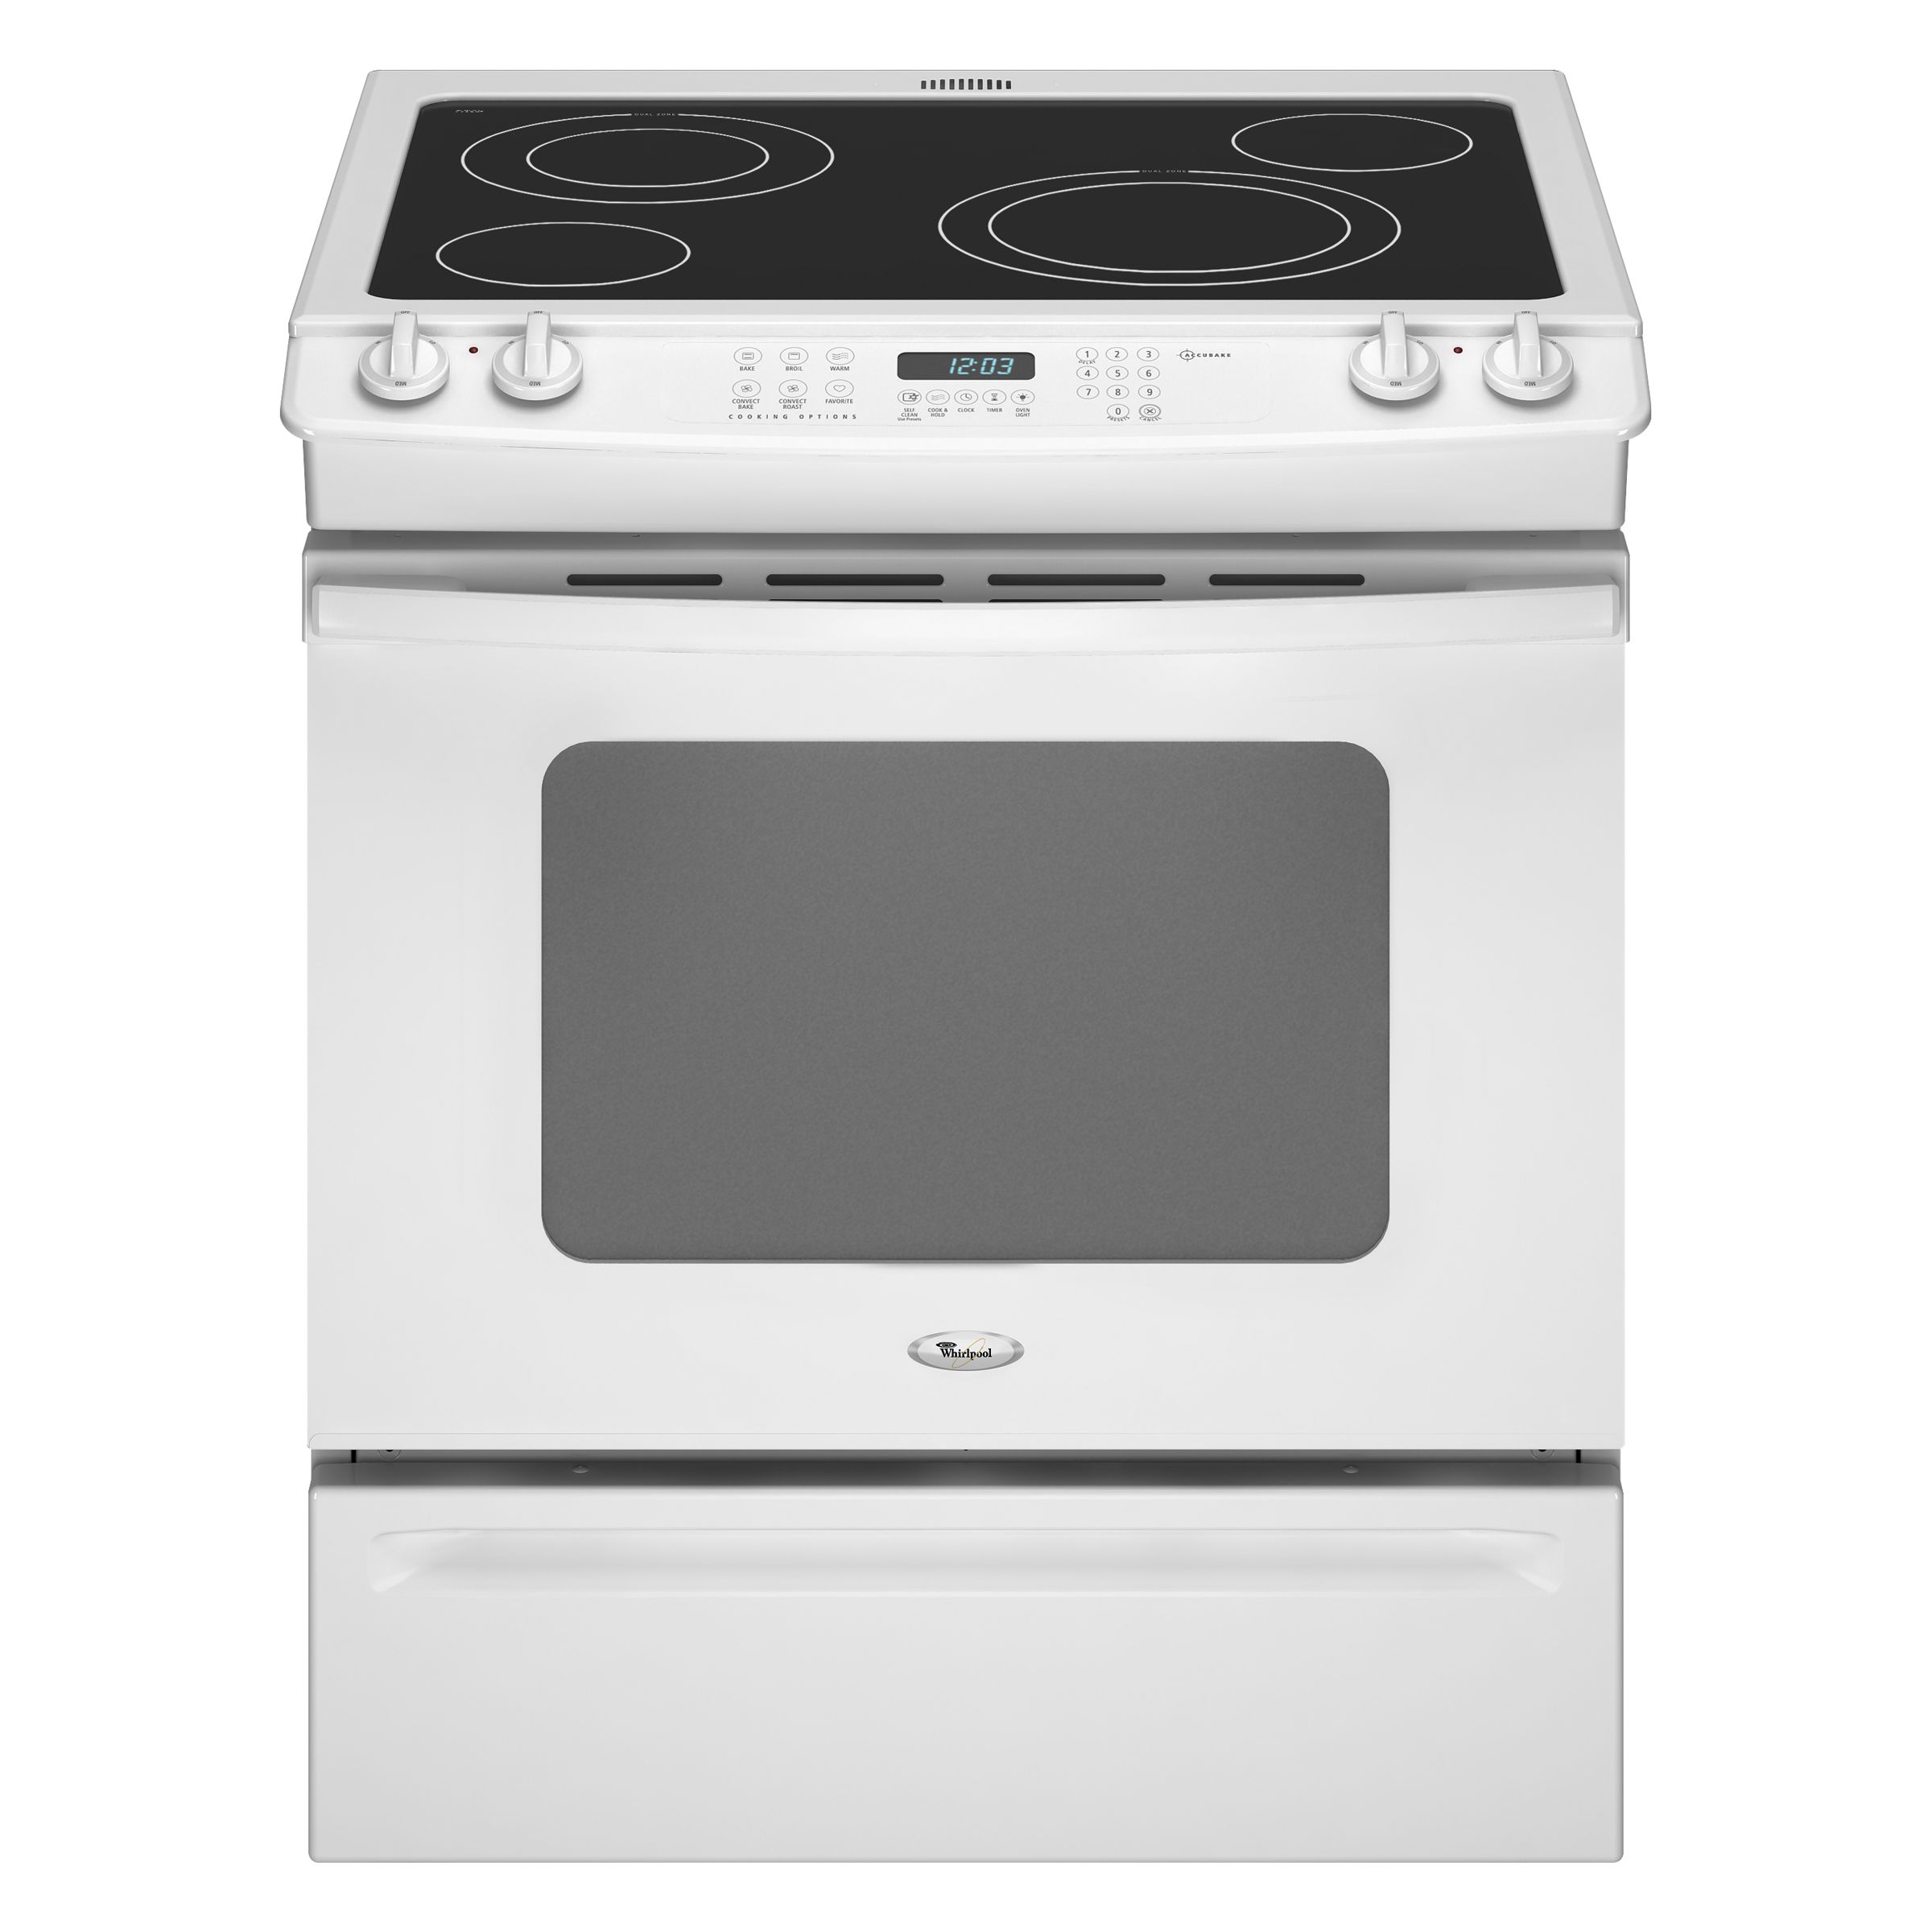 Whirlpool GY399LXUQ 30" Slide-In Radiant Range w/ Convection